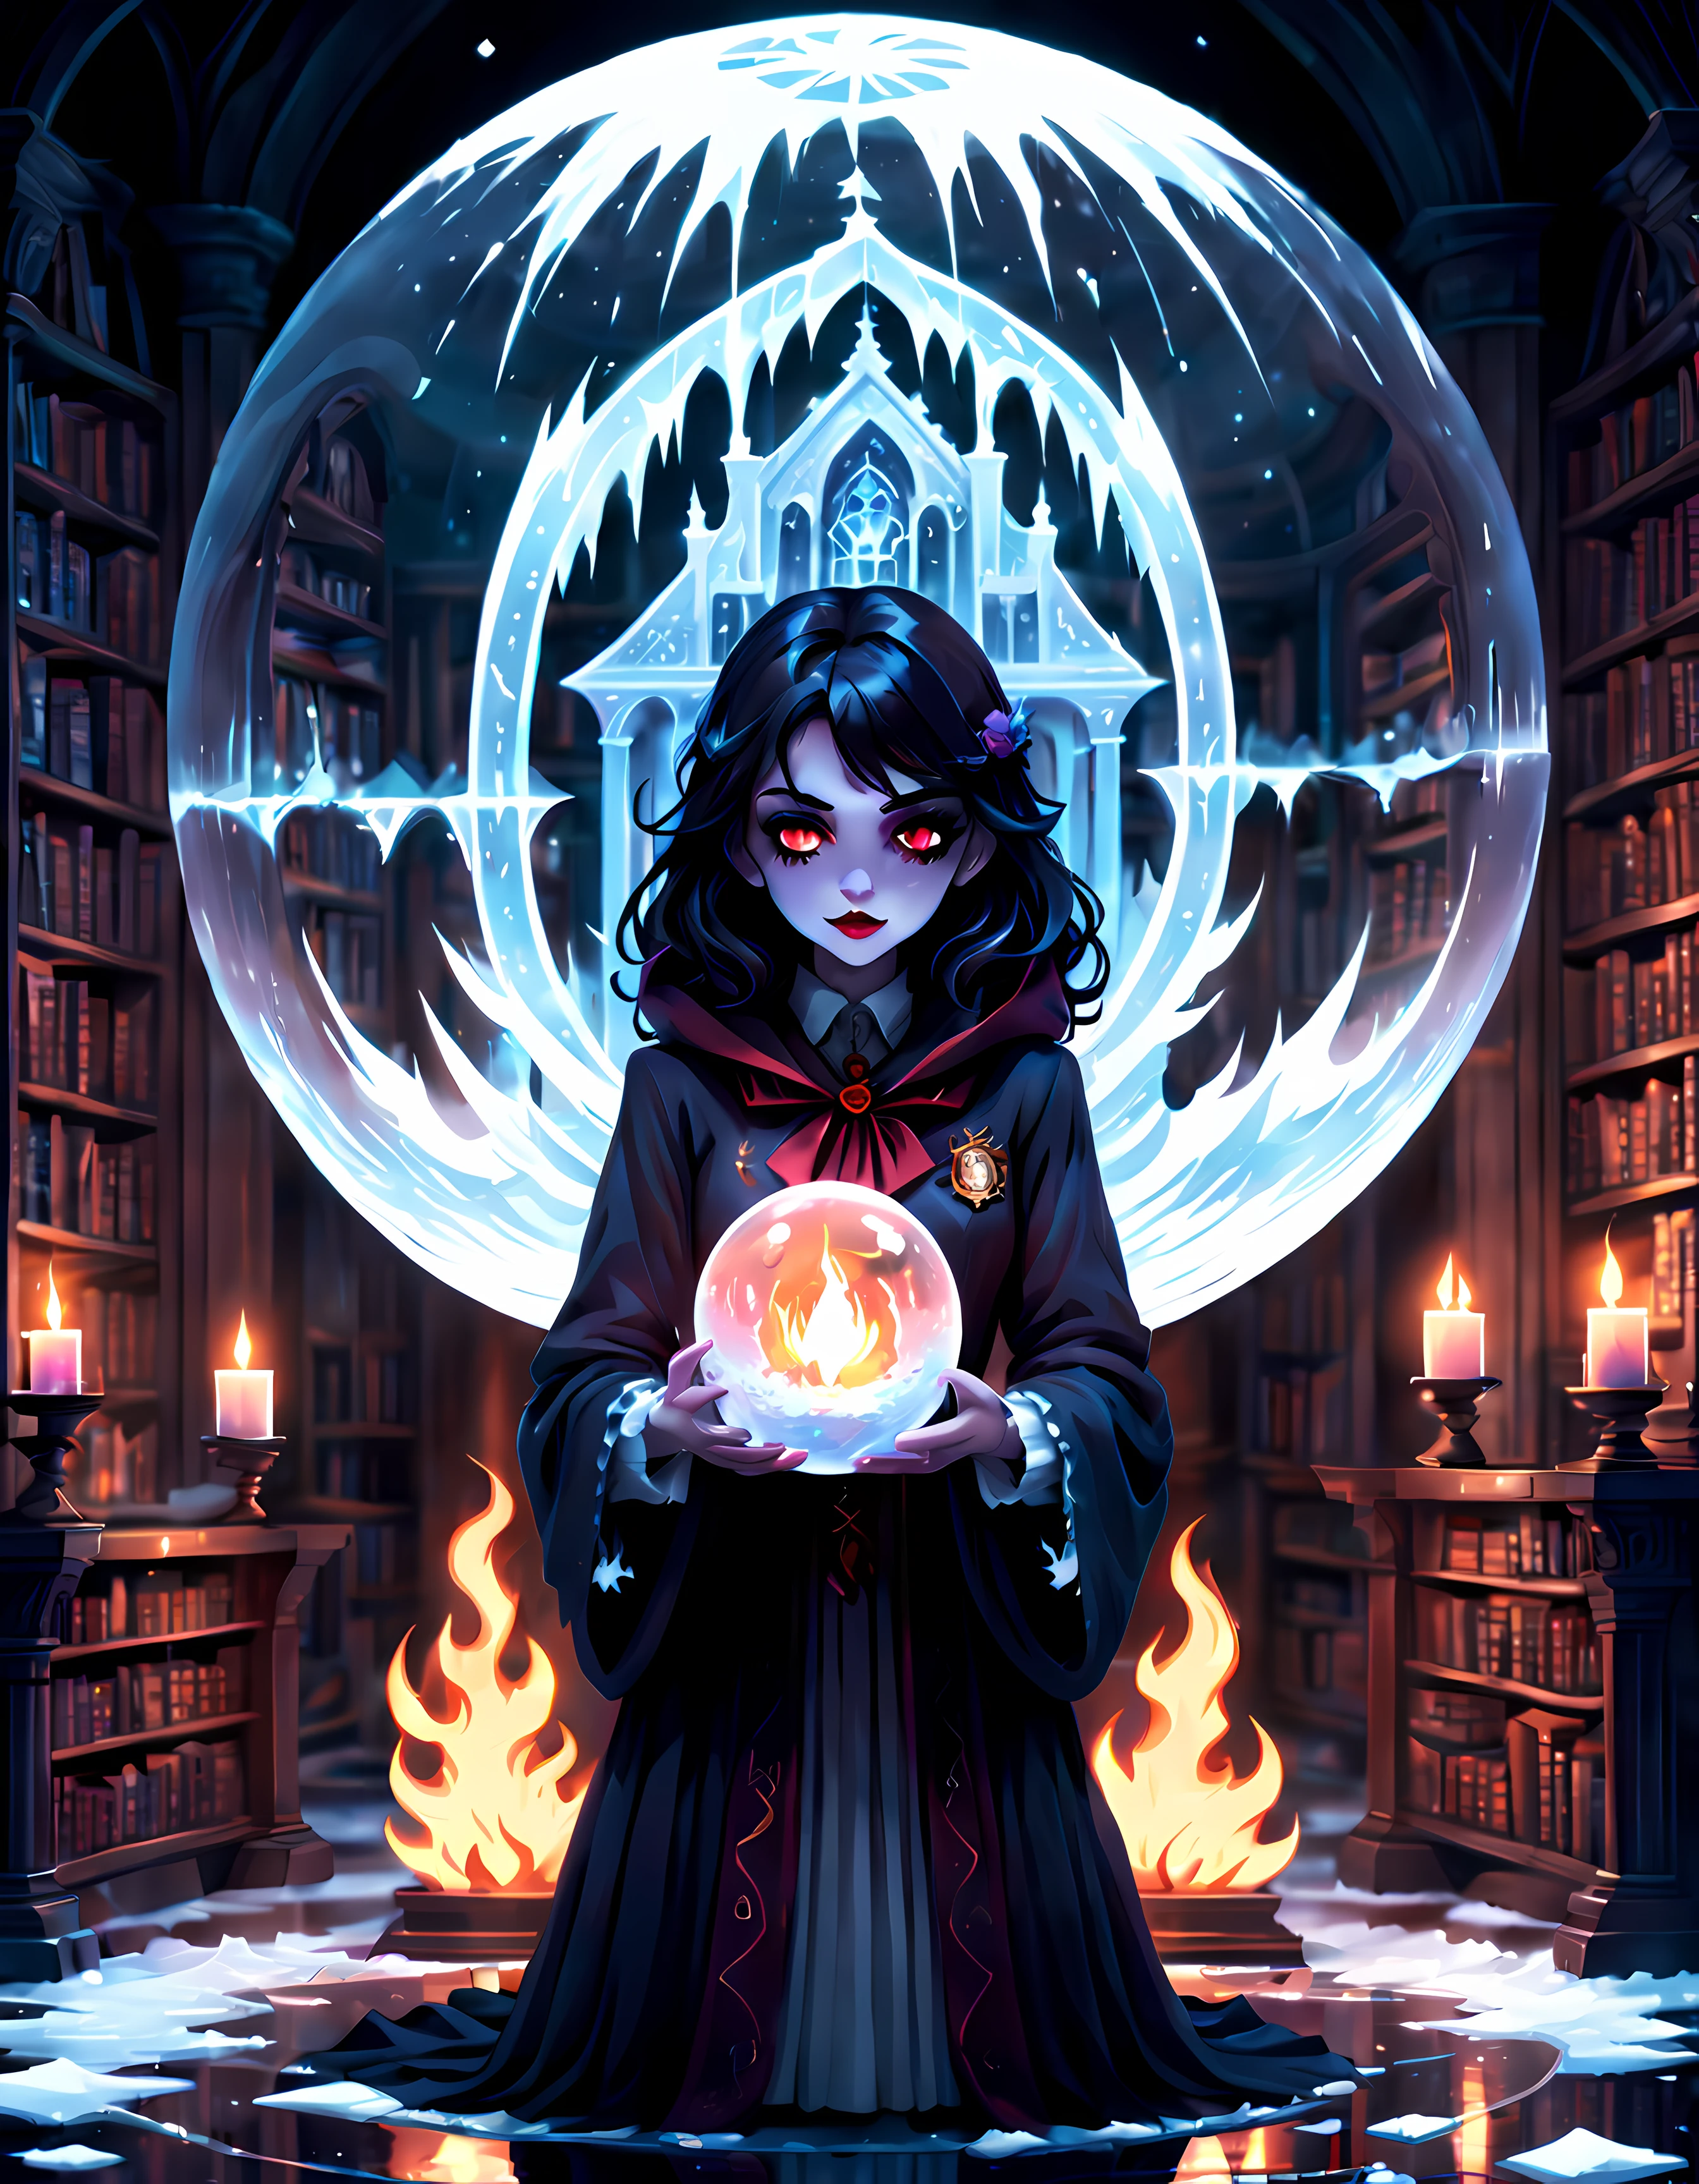 (Pixel Art:1.5), (獨自的:1.3), A (stunning vAmpire girl) ((((holding A mAgicAl AcAdemy inside An icy sphere with burning edges))))), (((concentrAted look))), ((weAring A robe with rich gothic pAtterns)), (inside An old librAry dimly lit with cAndles), ((eerie cosmic portAl behind the girl)), (ethereAl shiny spArkles:1.2), pixel Art